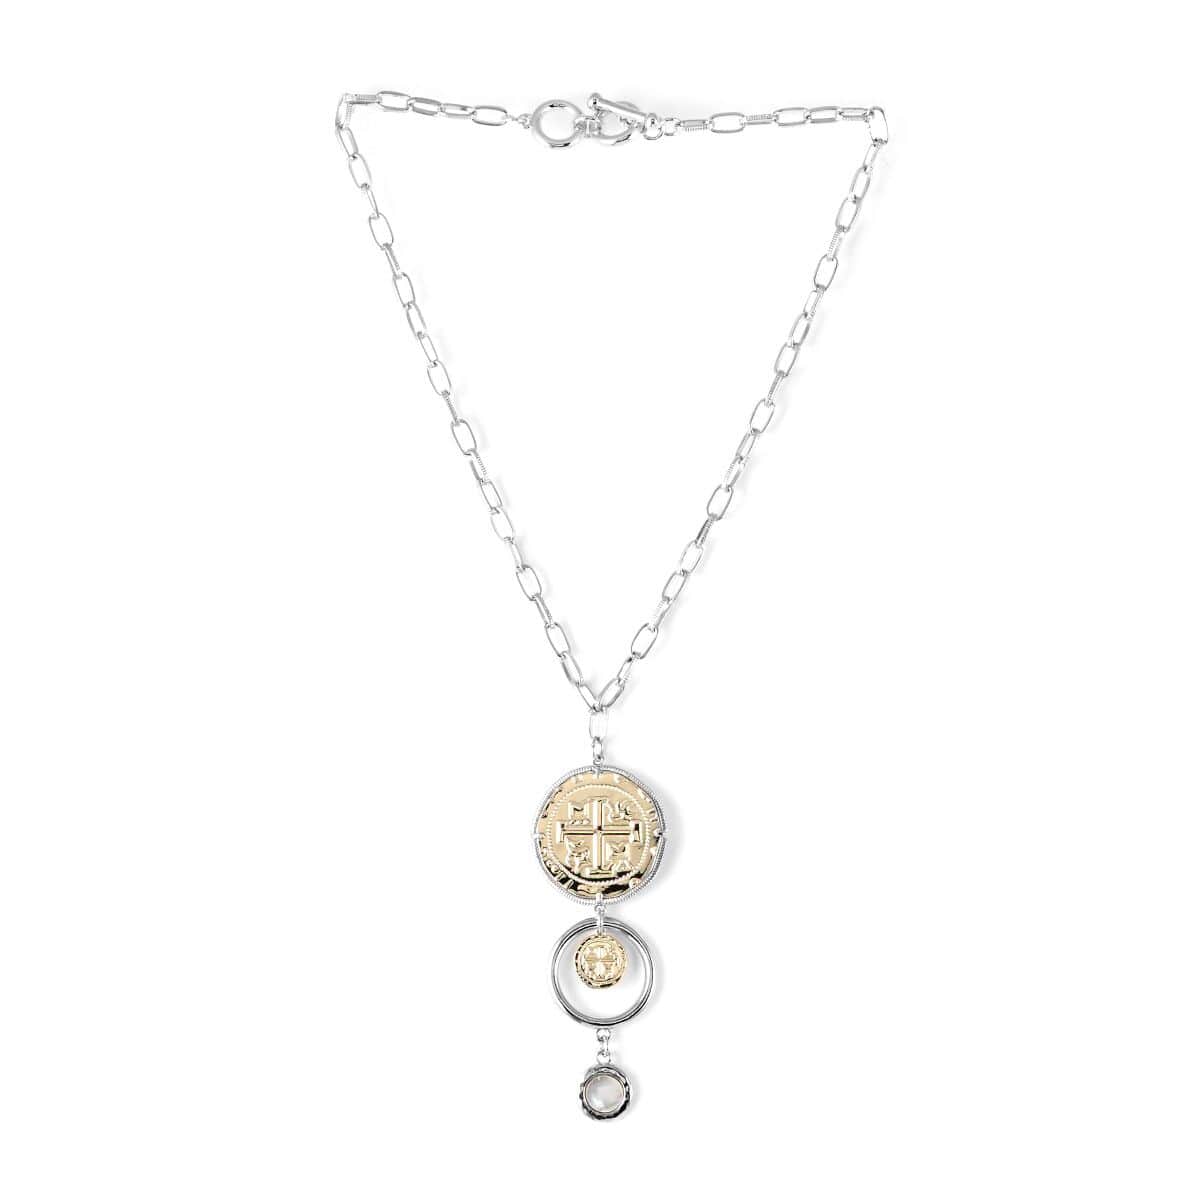 MX Signature Collection Two-Tone Coin Inspired Drop Necklace 16 Inches in Silvertone and Goldtone image number 4